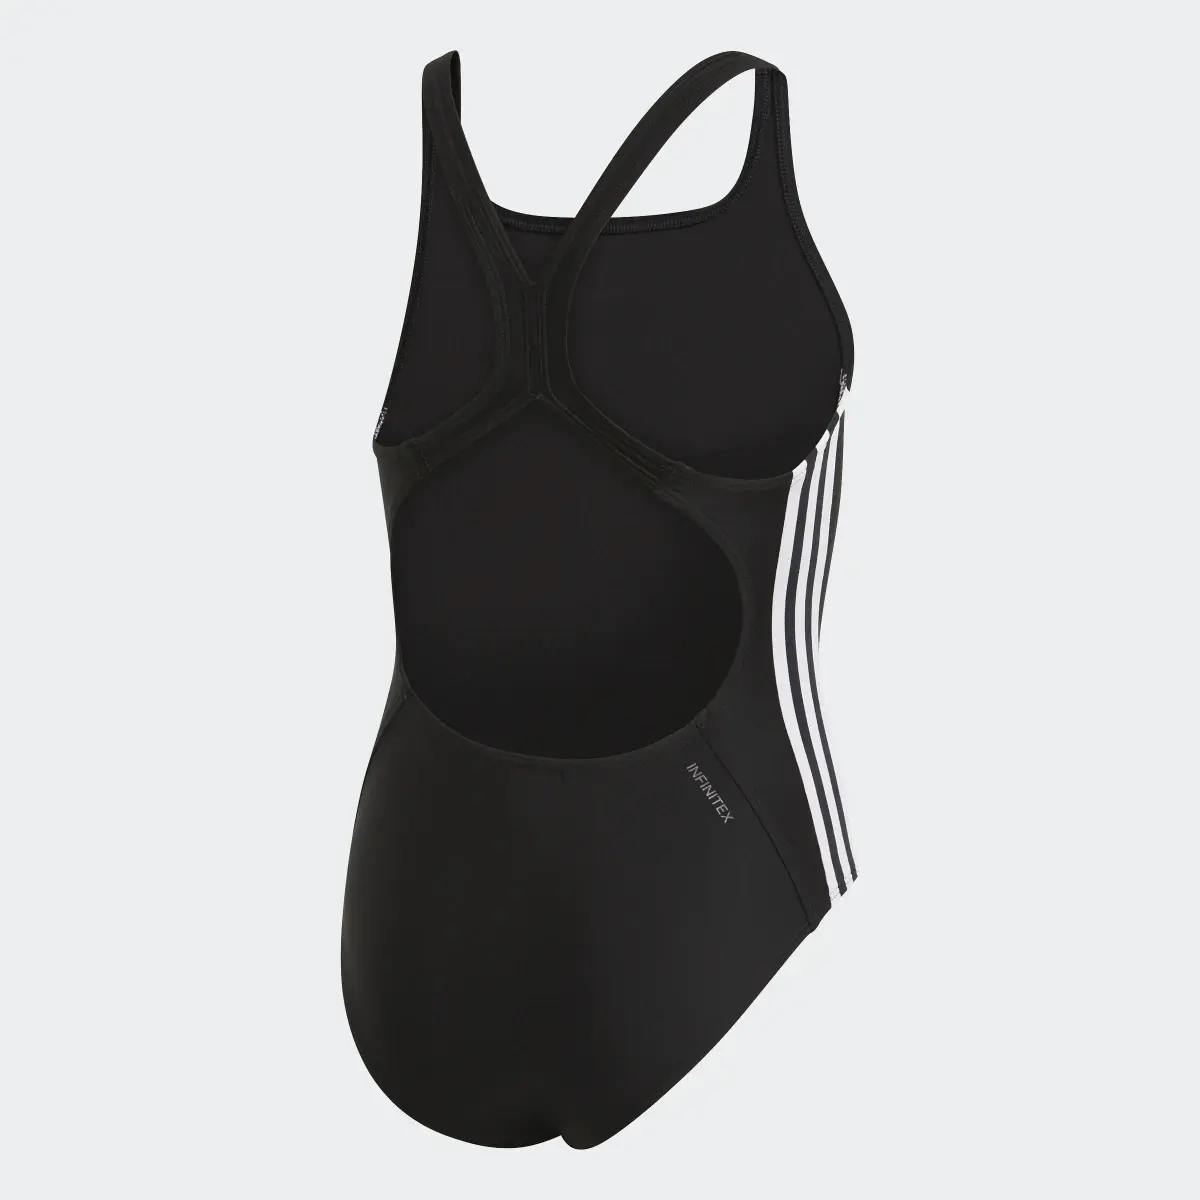 Adidas Athly V 3-Stripes Swimsuit. 2